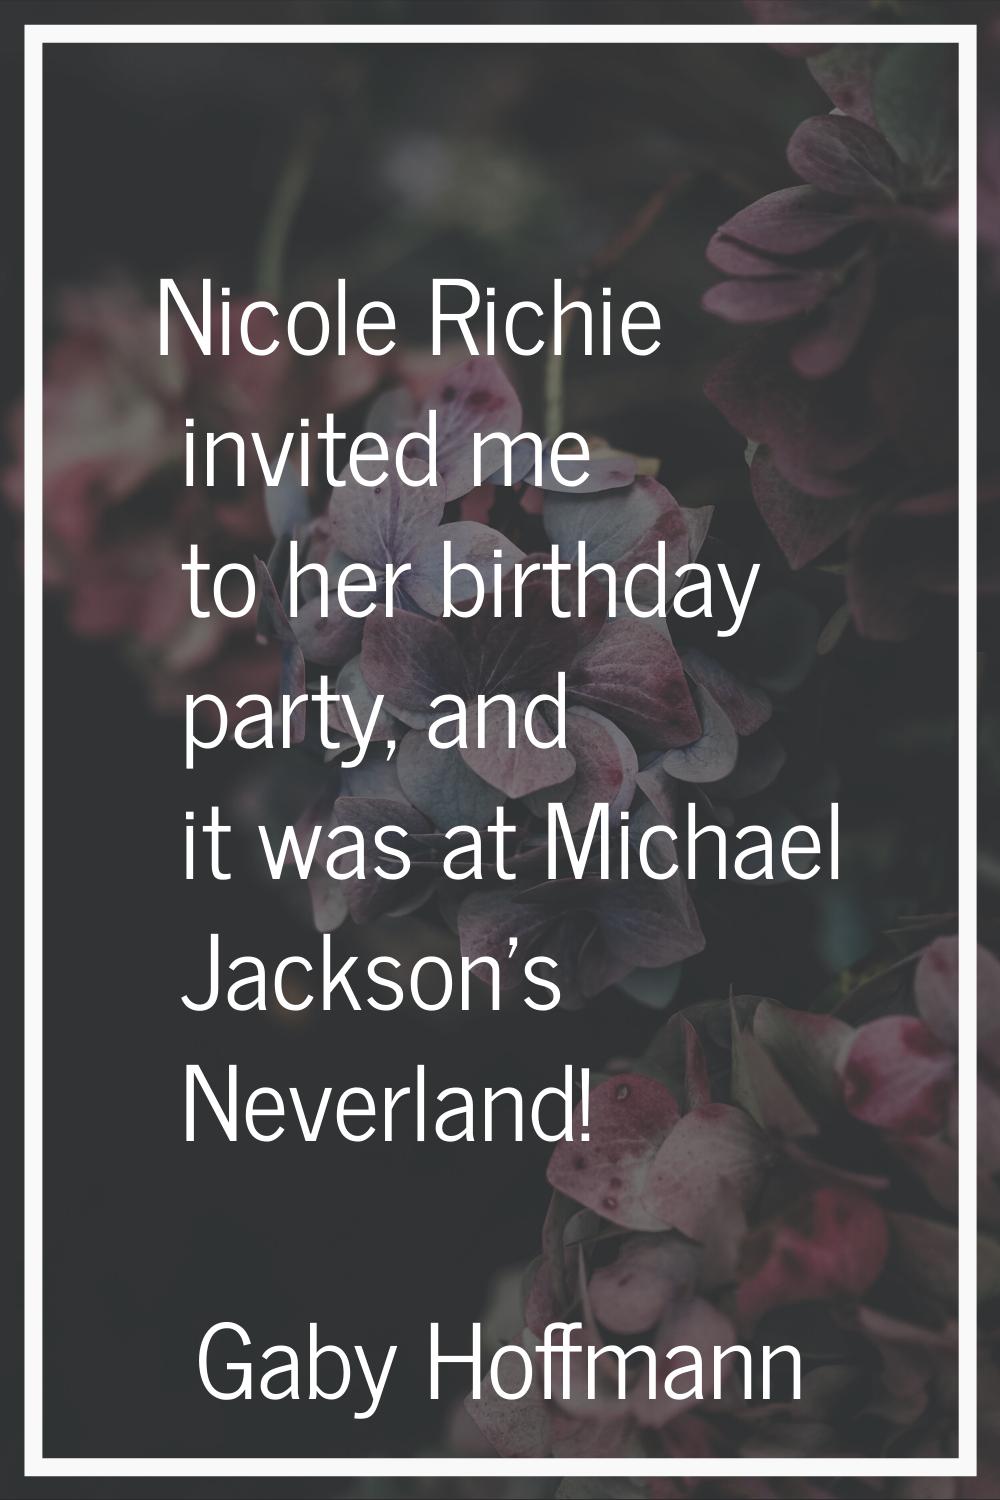 Nicole Richie invited me to her birthday party, and it was at Michael Jackson's Neverland!